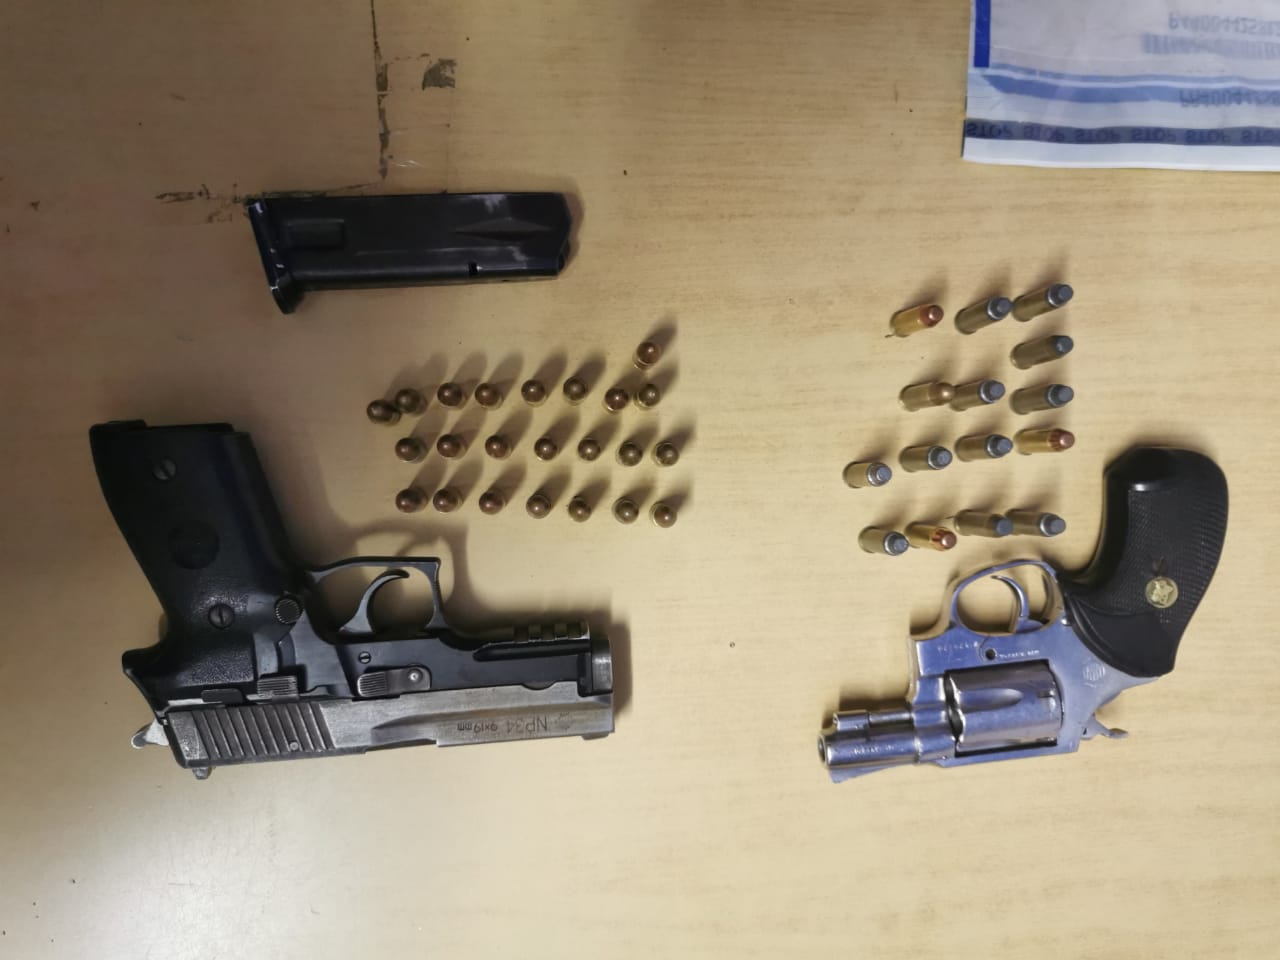 Anti-Gang Unit members arrest four men and seize four unlicensed firearms and ammunition after gang shootings in Steenberg